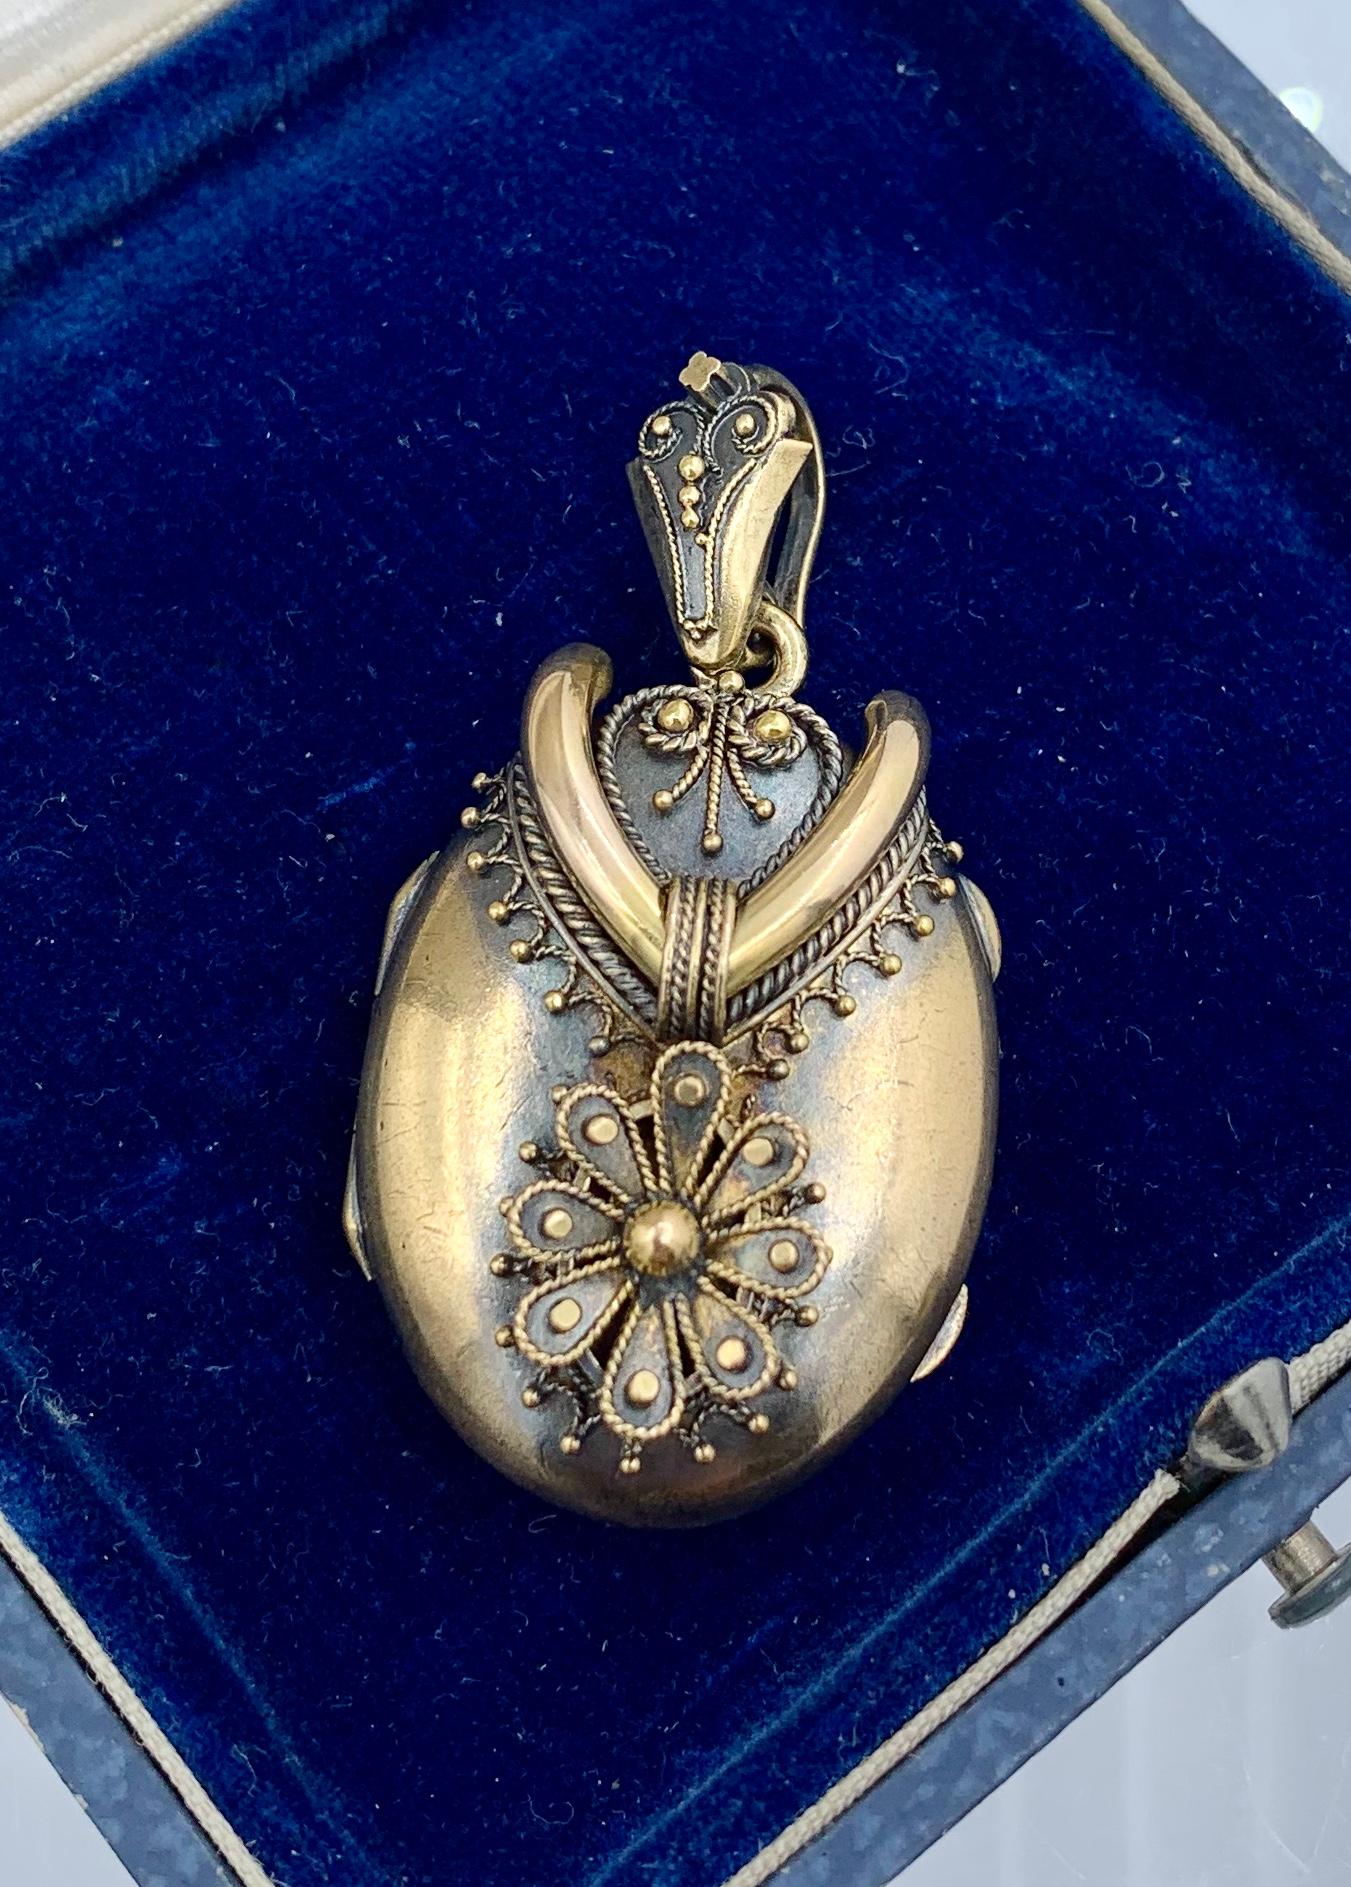 This is a gorgeous 14 Karat Gold Victorian - Belle Epoque Picture Locket pendant in an Etruscan Revival Design of great beauty.  The locket has the most stunning warm brushed 14 Karat Gold work with fantastic raised beaded cannetille designs with